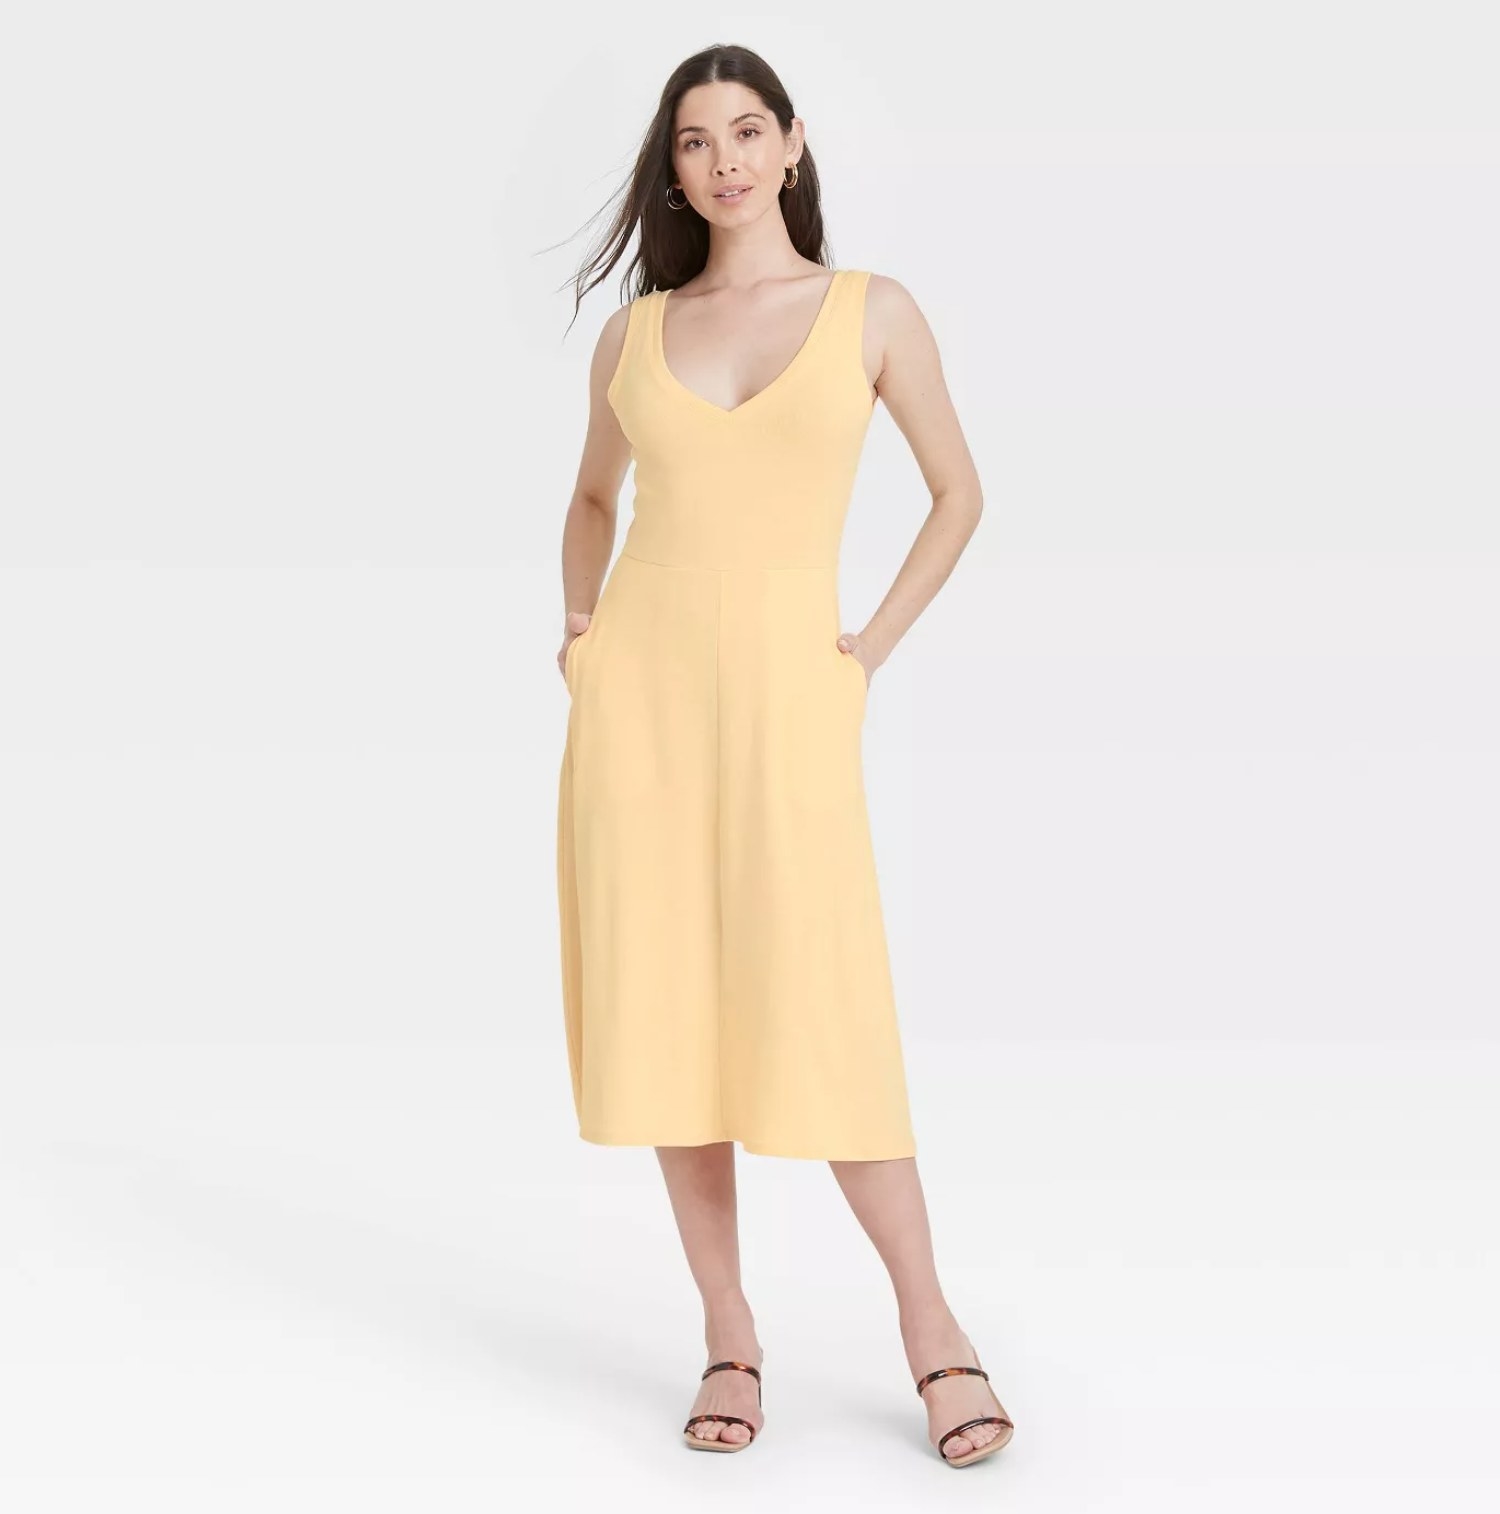 model wearing the dress in yellow with strappy sandals